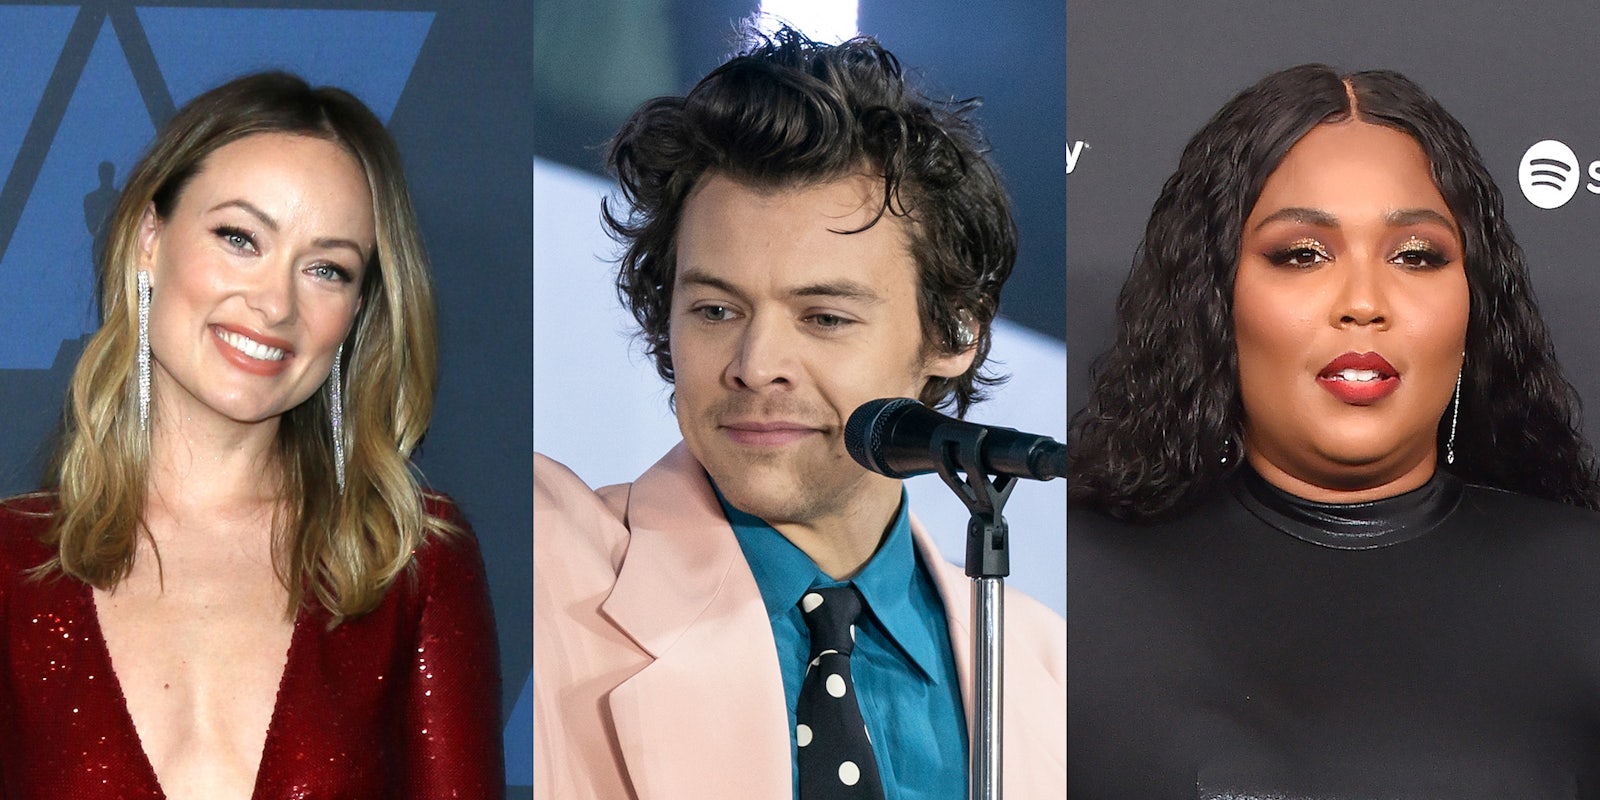 olivia wilde, harry styles, and lizzo